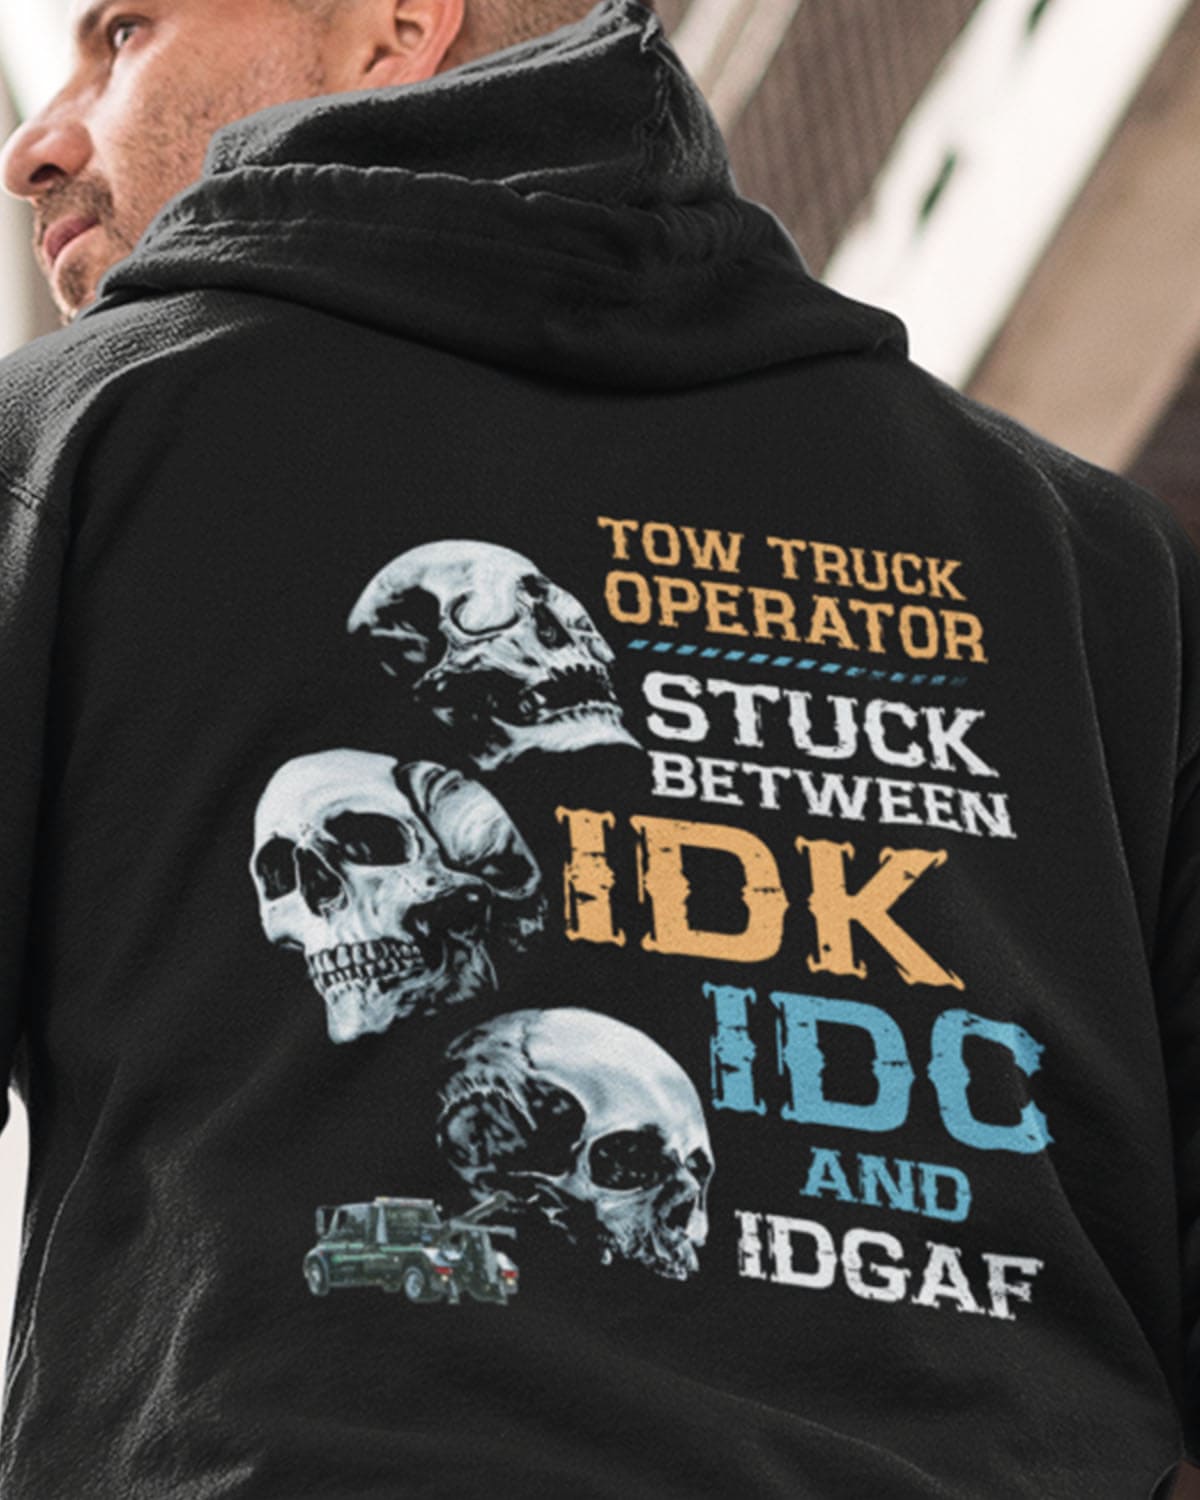 Tow truck operator - Stuck between IDK IDC and IDGAF, skull and tow truck